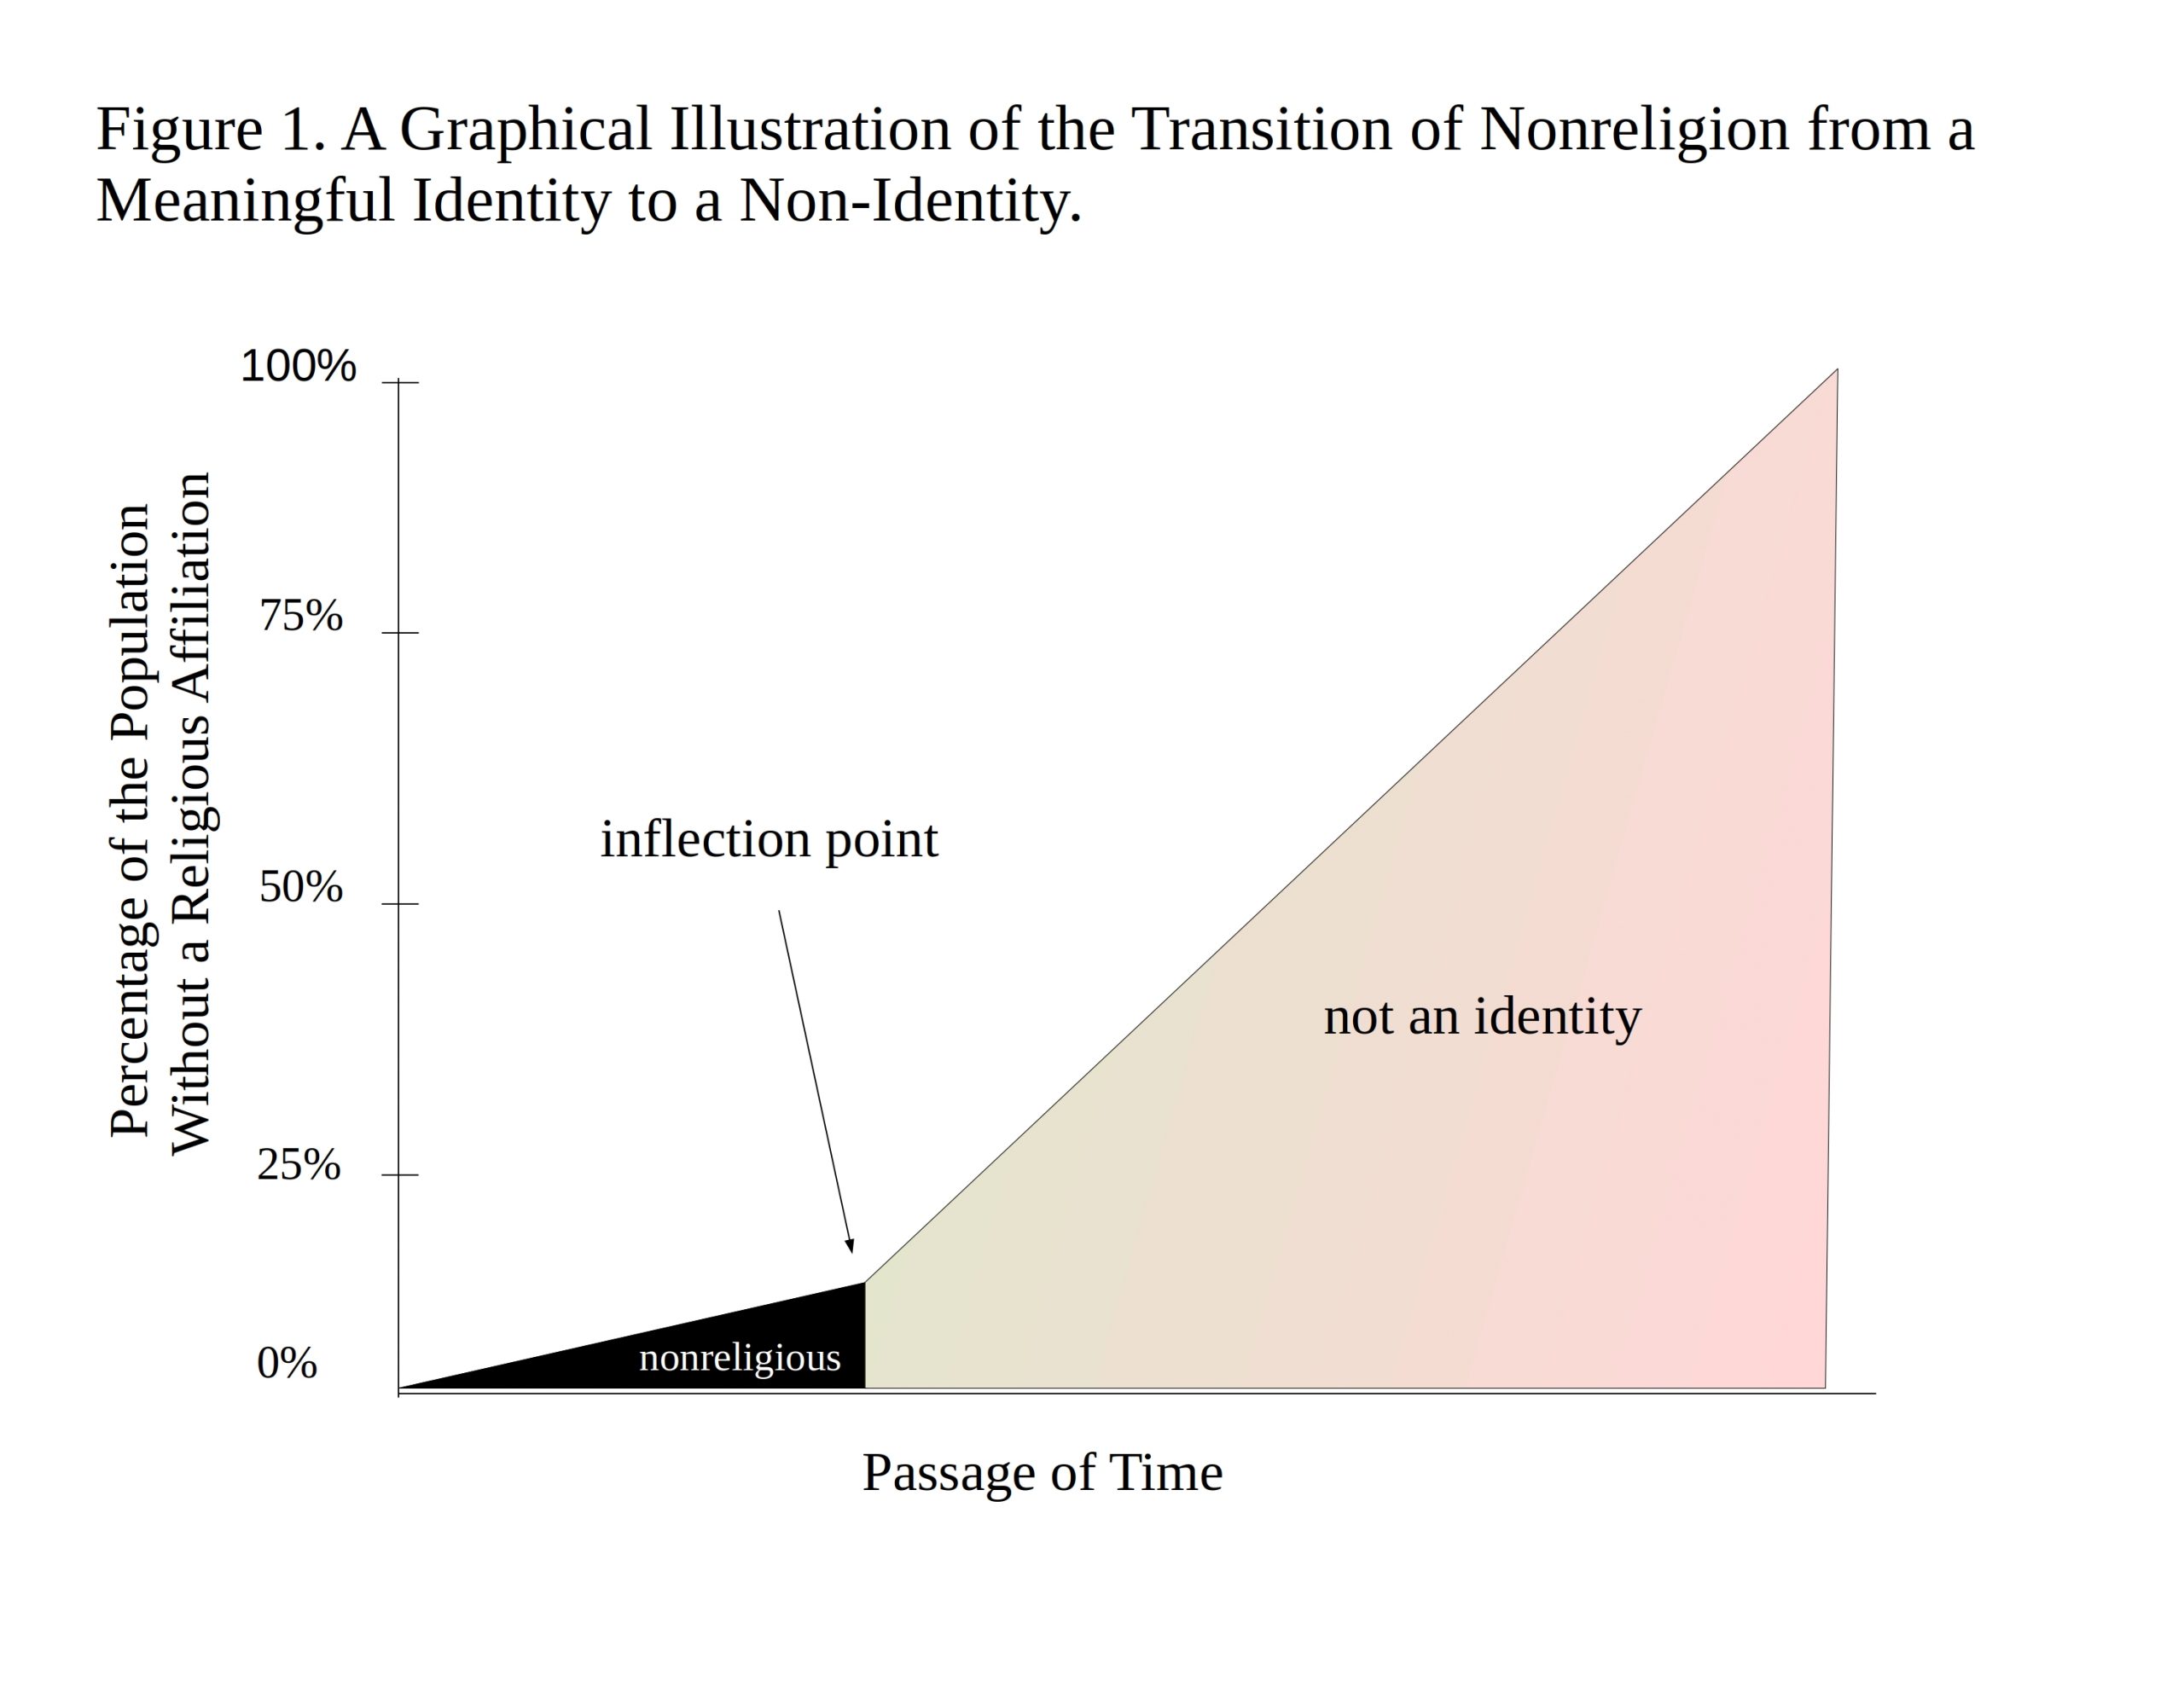 graph showing shift in identity over time